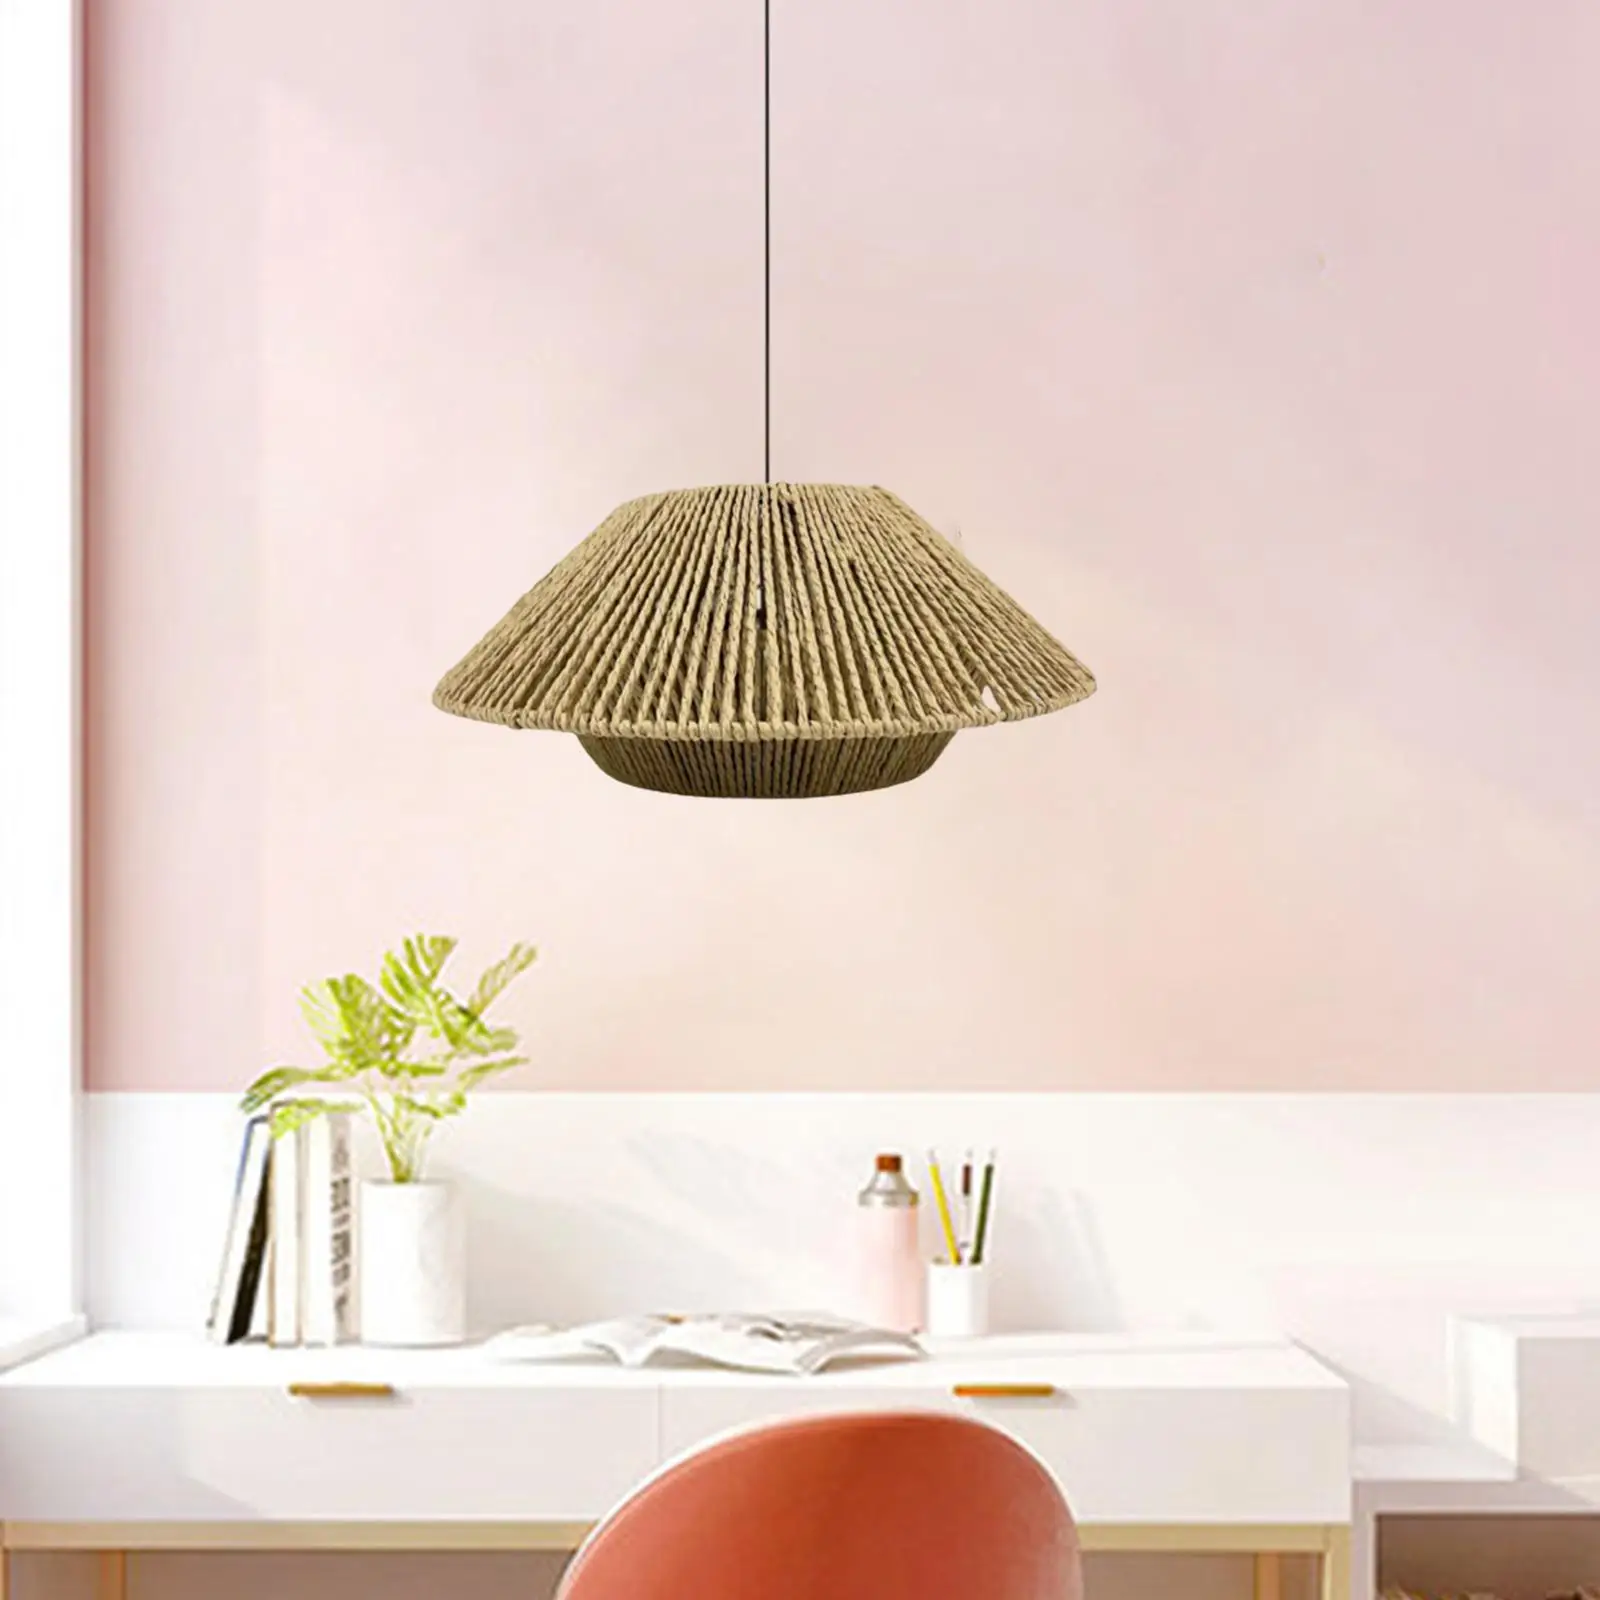 Handwoven Rope Lampshade Reading Light Lanterns Ceiling Light Fixture Cover Pendant Lamp Shades for Kitchen Island Dining Room